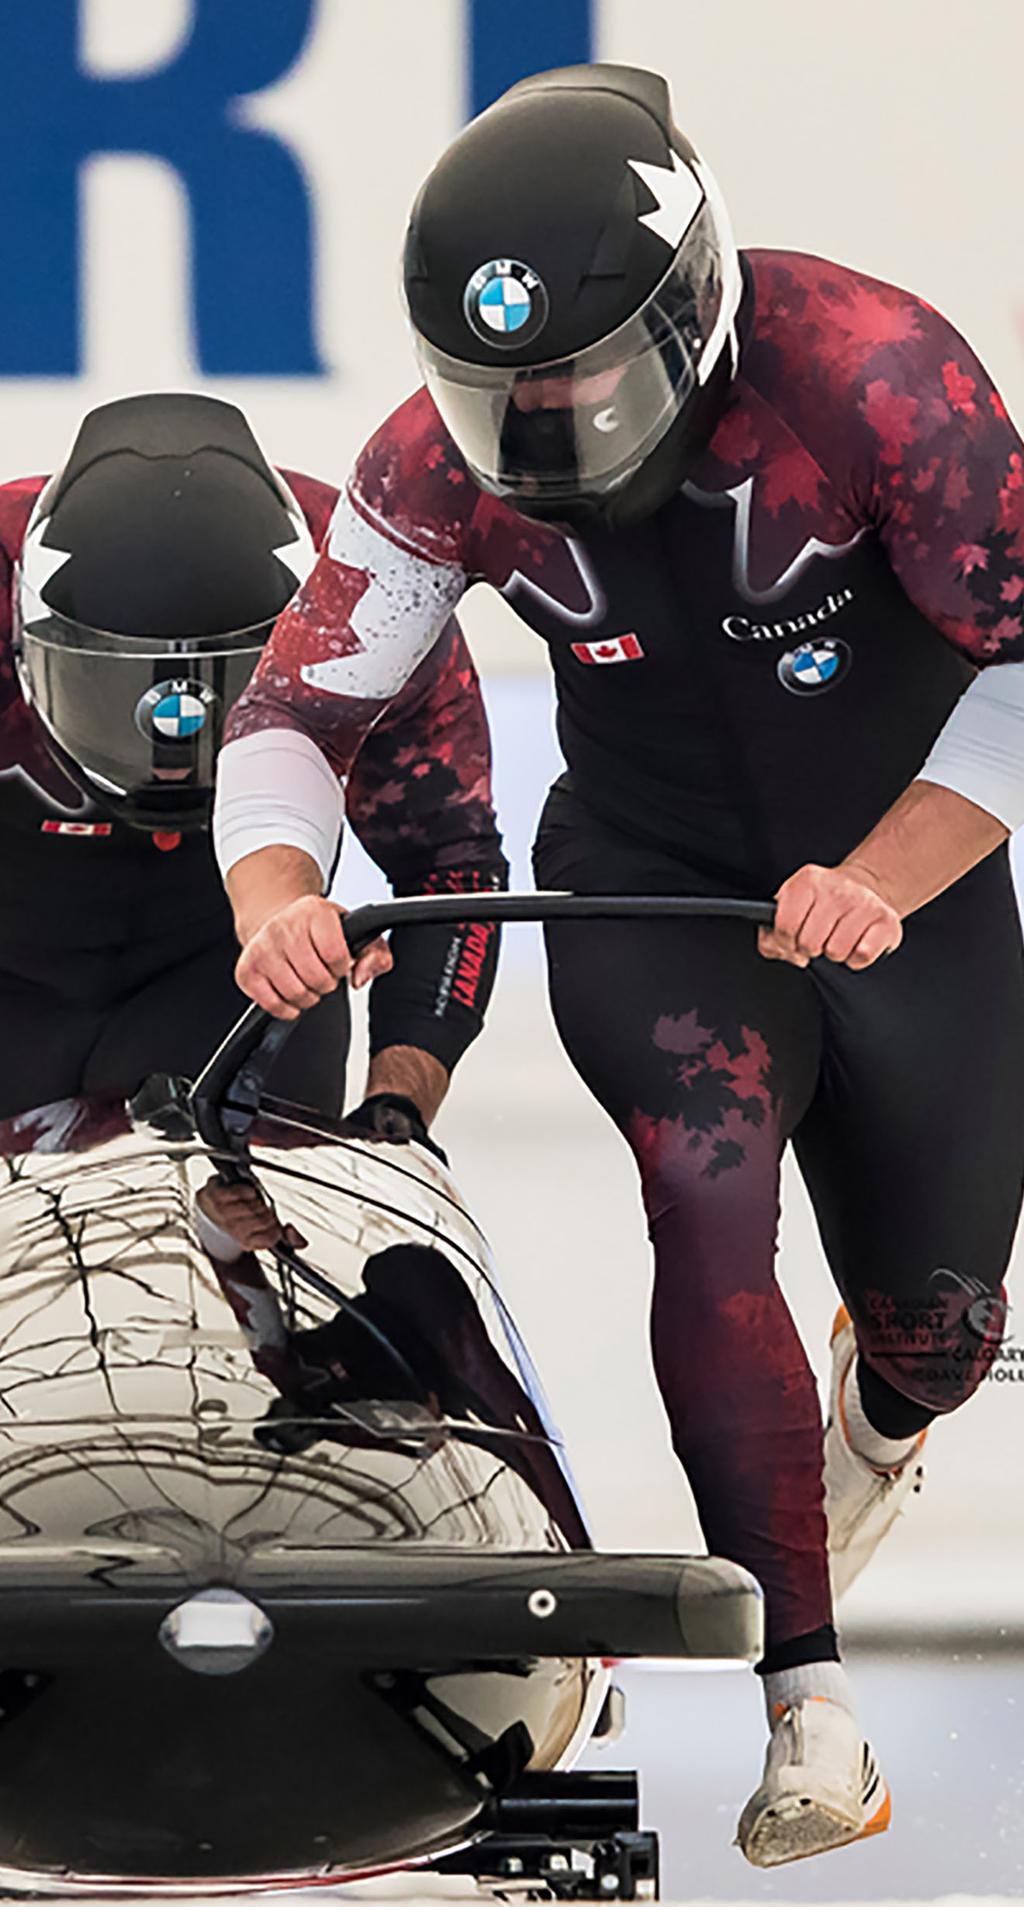 ATHLETIC ACHIEVEMENTS 2016 2017 Season March 18 th 2017, Nick and his 2-man Bobsleigh partner, Lascelles Brown, finished 4 th place in the PyeongChang Korea Winter Olympics World Championship test